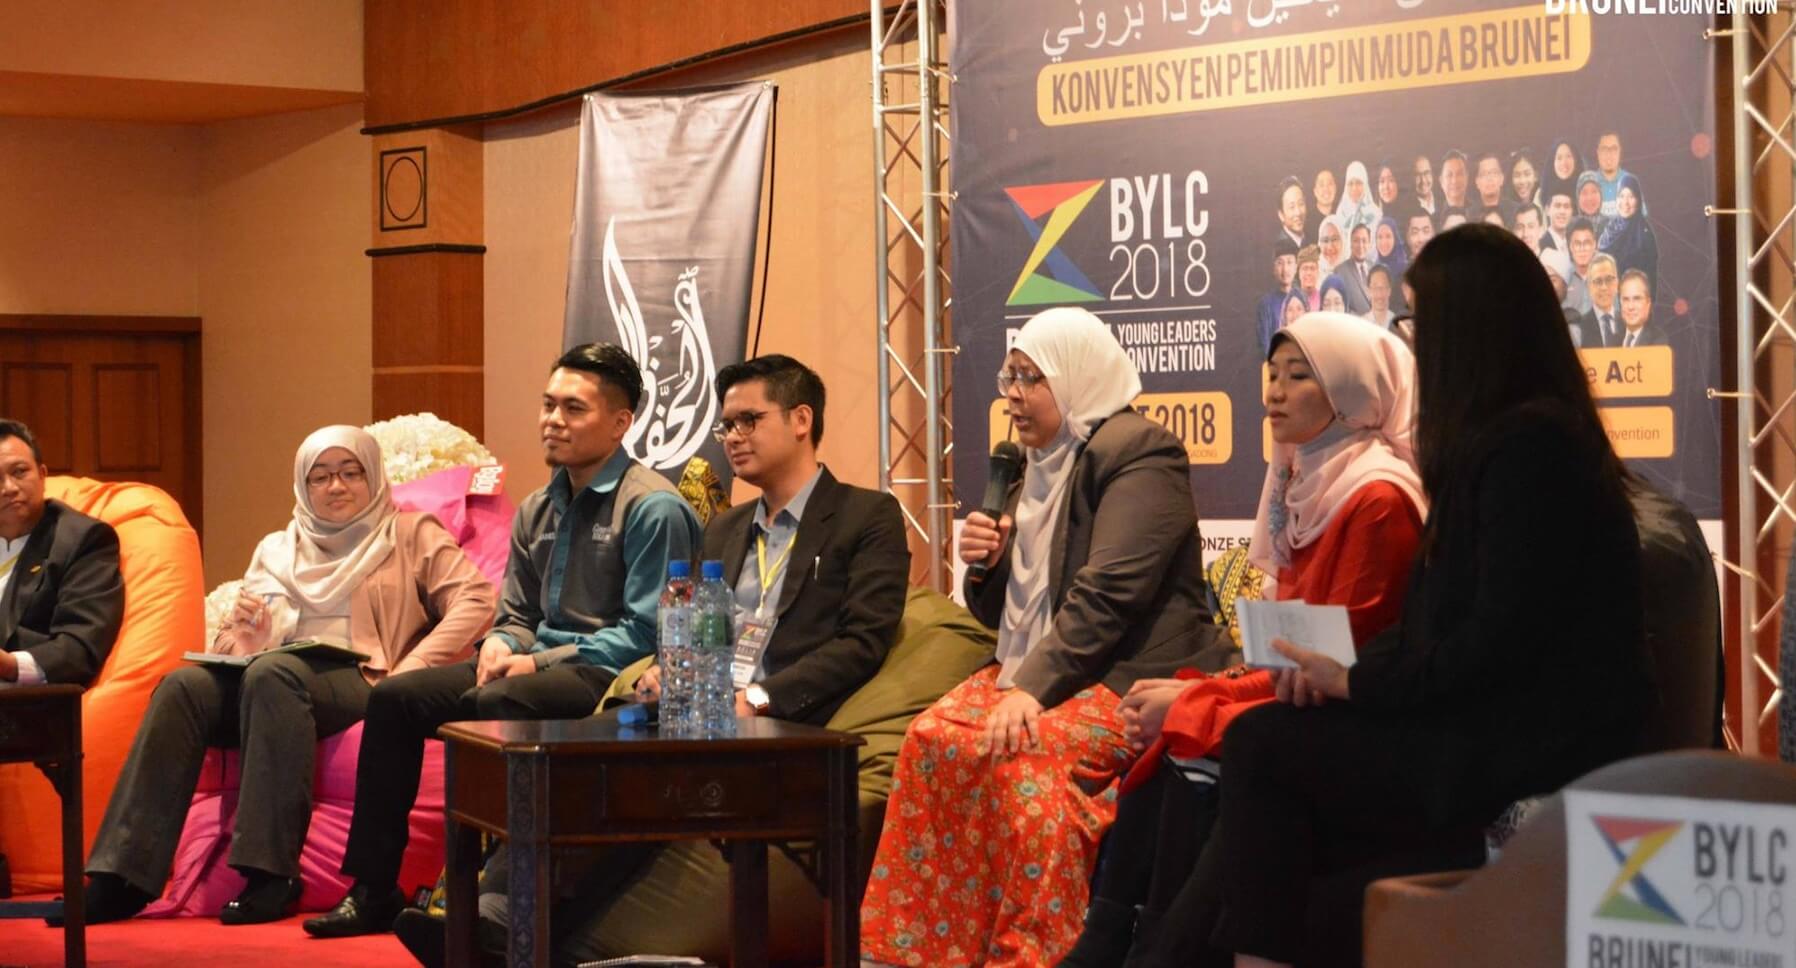 Brunei Young Leaders Convention